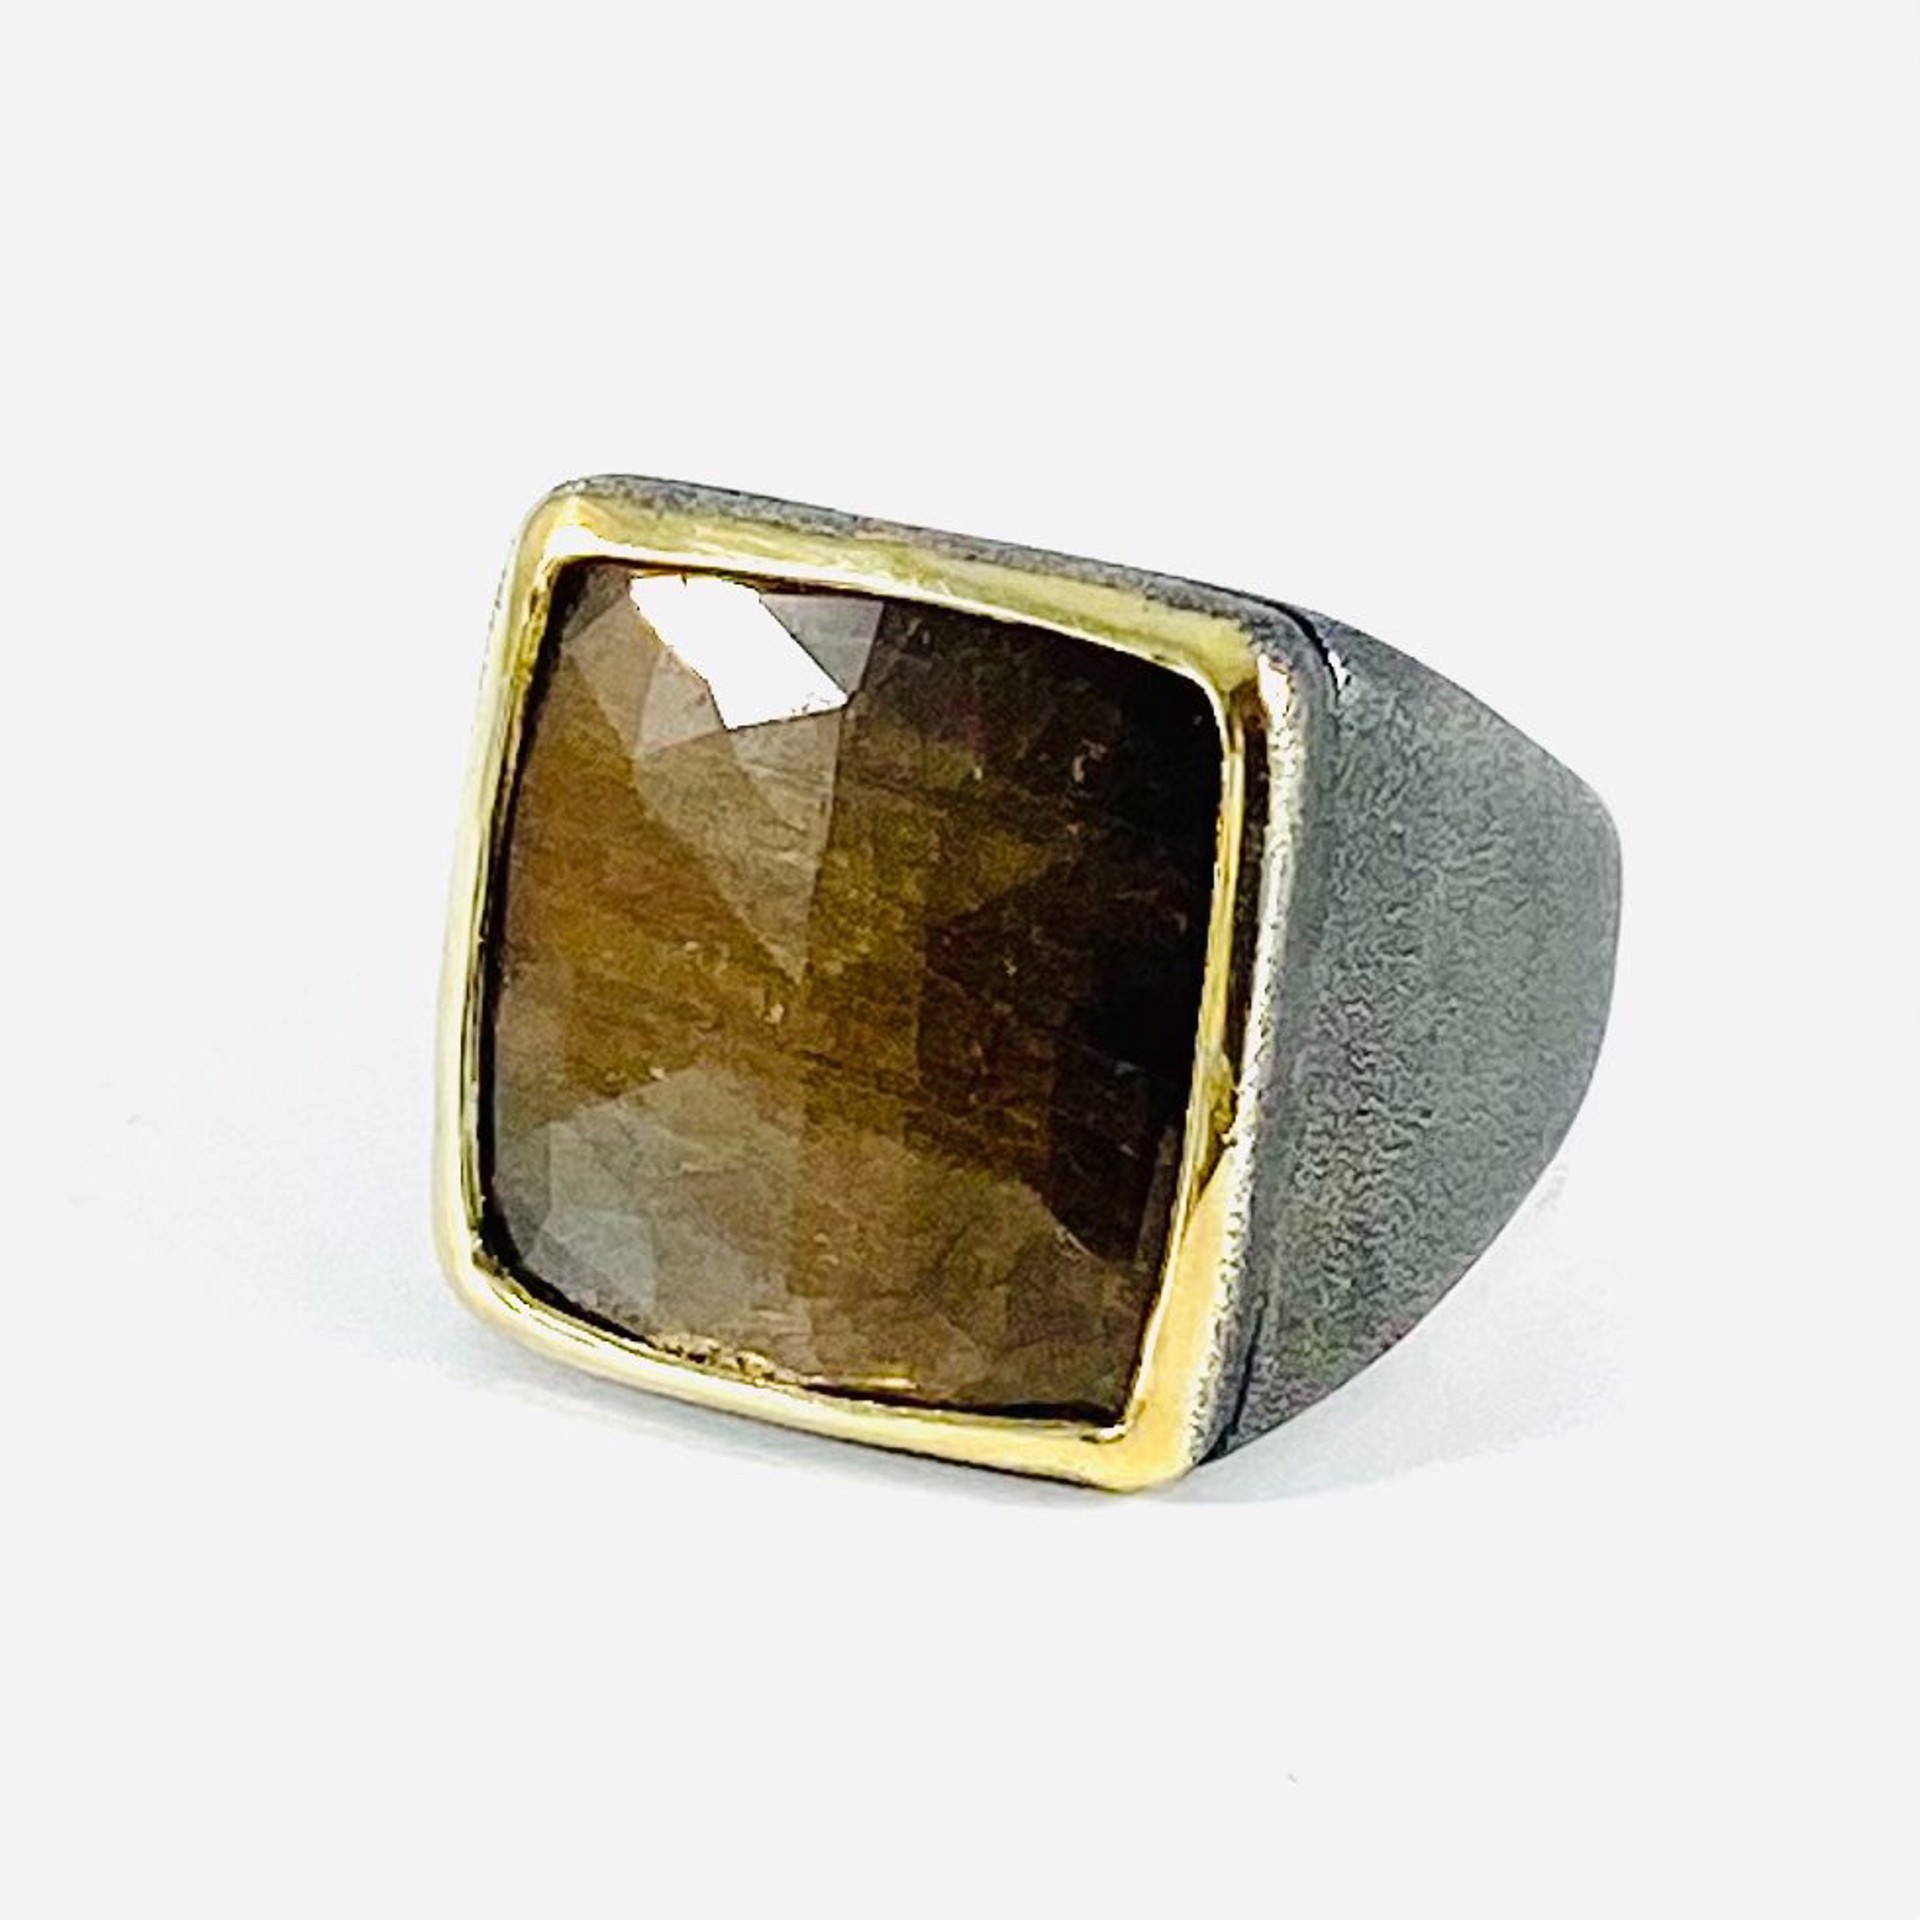 Large Faceted Square Sapphire Oxidized Silver Ring sz11.75 BORA22-13 by Bora